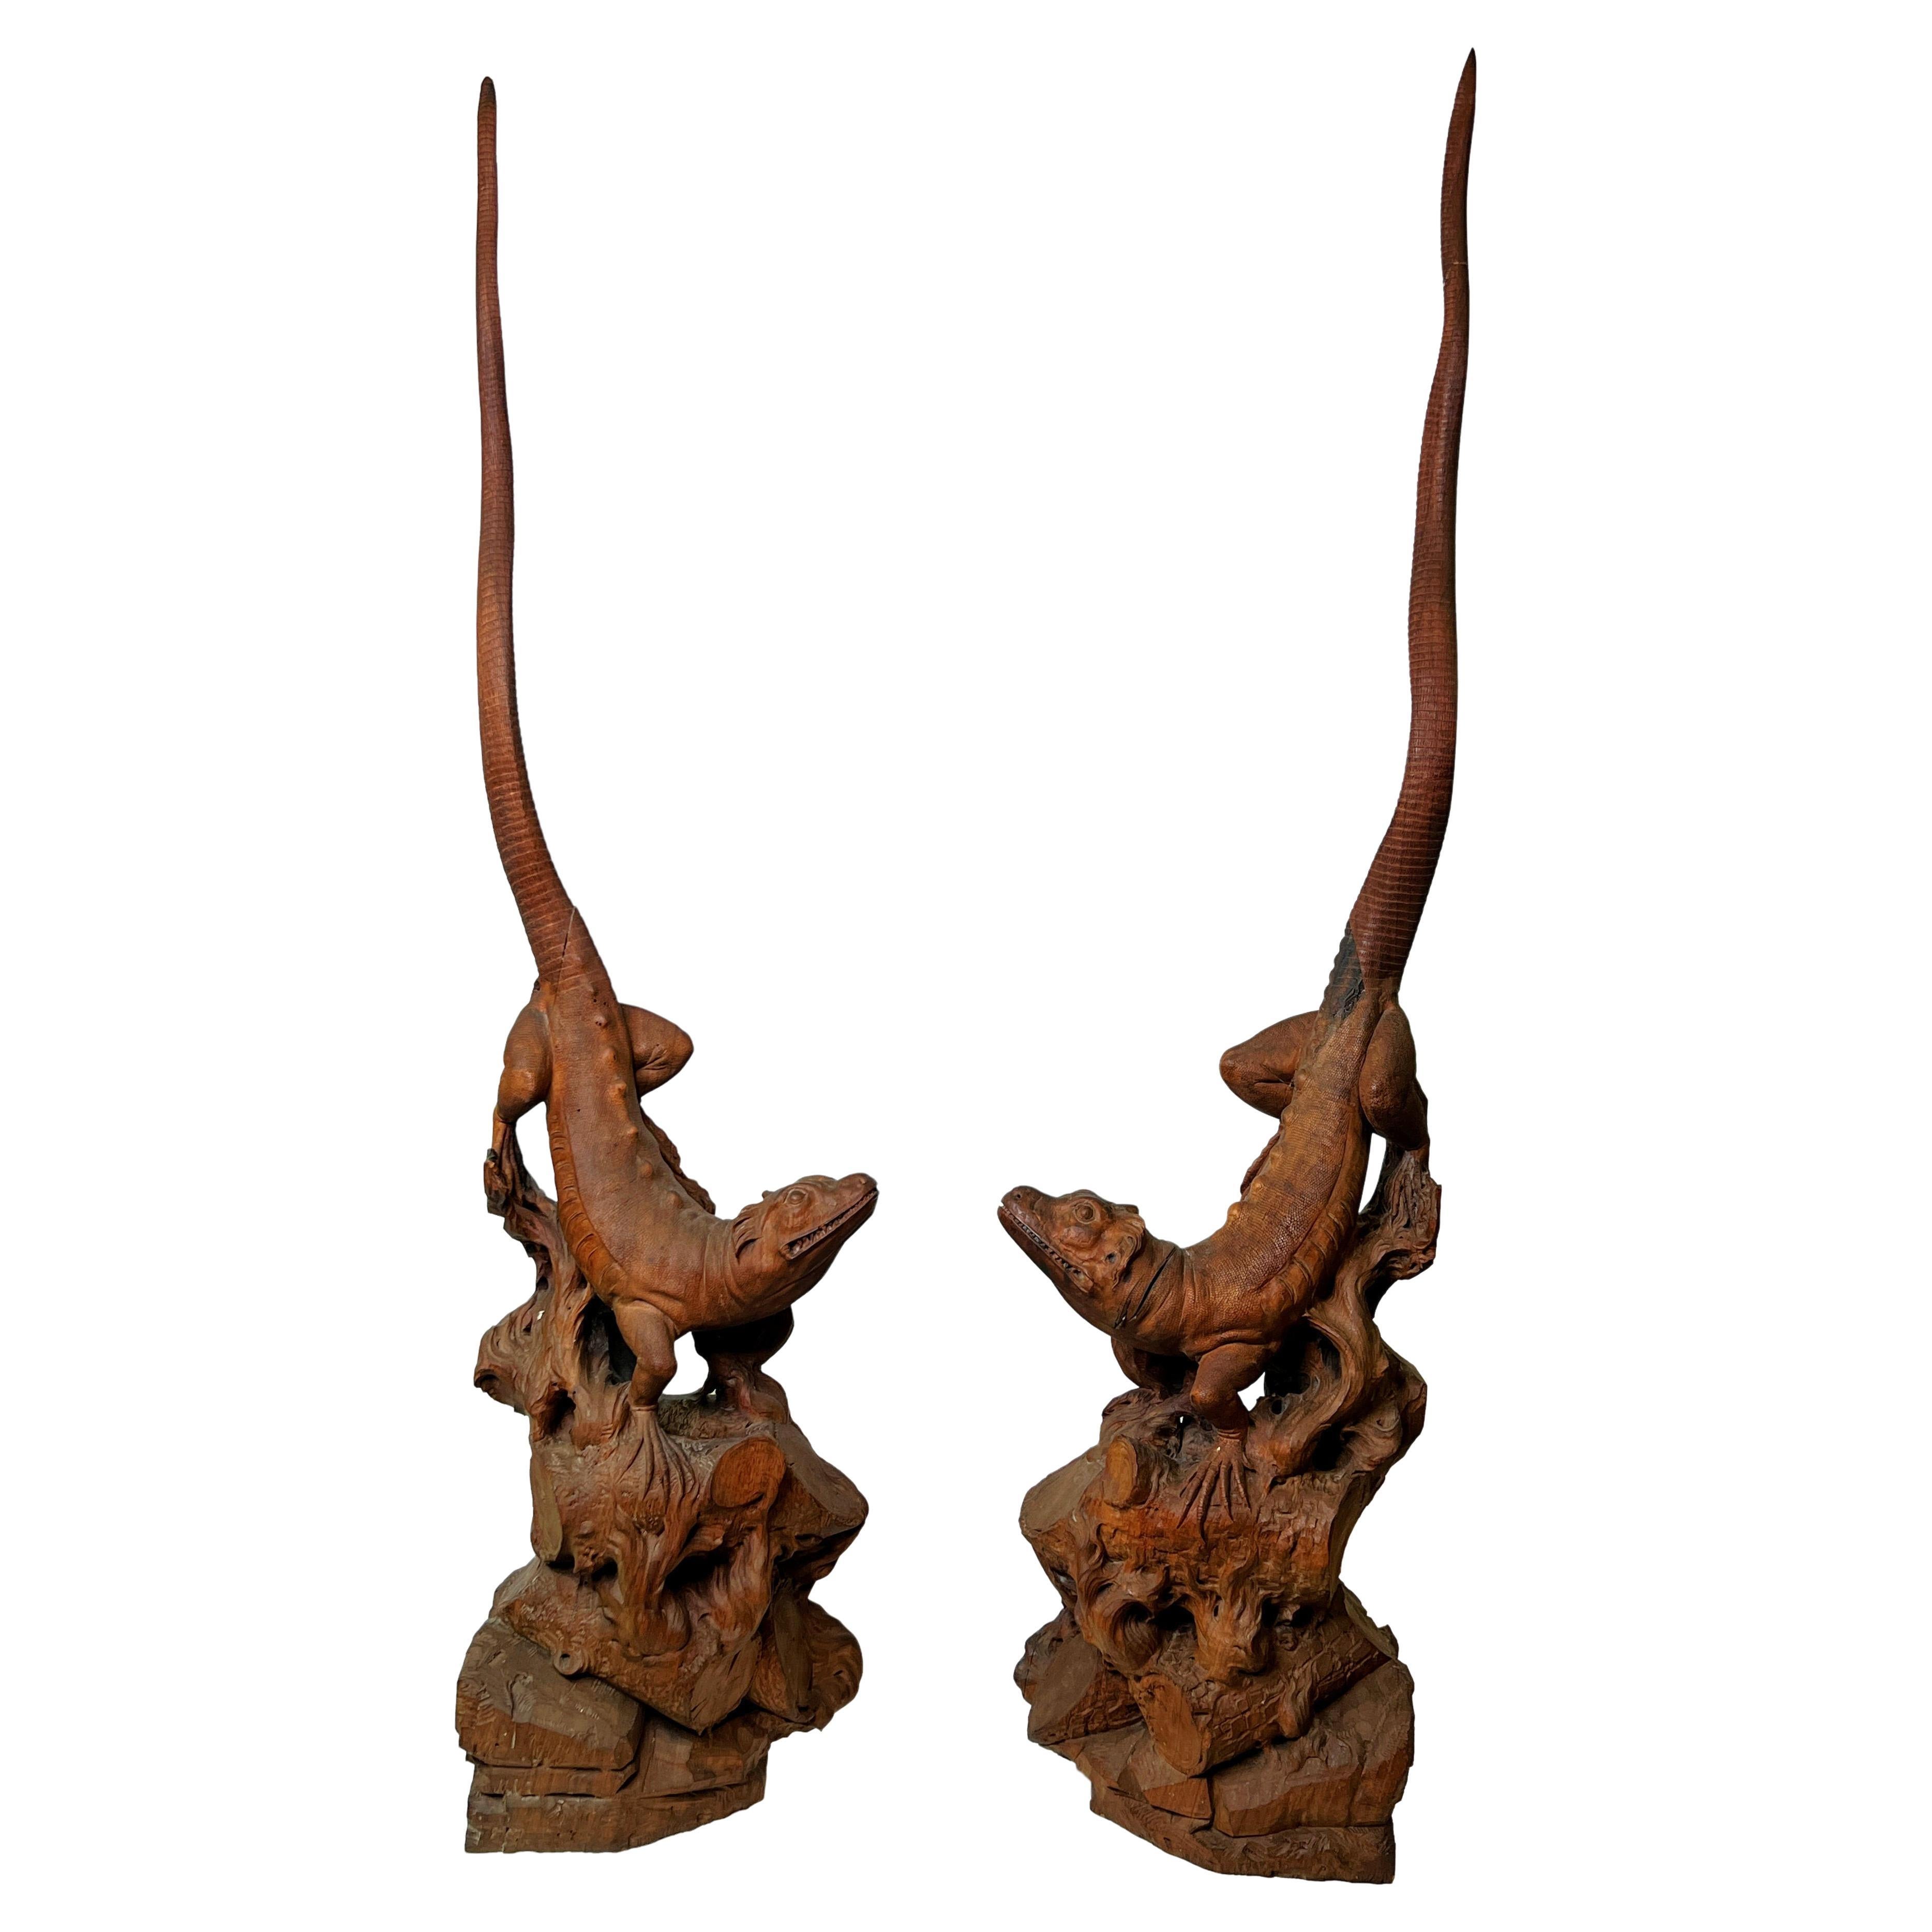 Our exotic pair of carved lizards measure 47 and 49 inches tall respectively and exhibit extraordinarily realistic details. Apparently unsigned, dating from the early 20th century, and believed to be of Asian origin. One side and rears are flat so